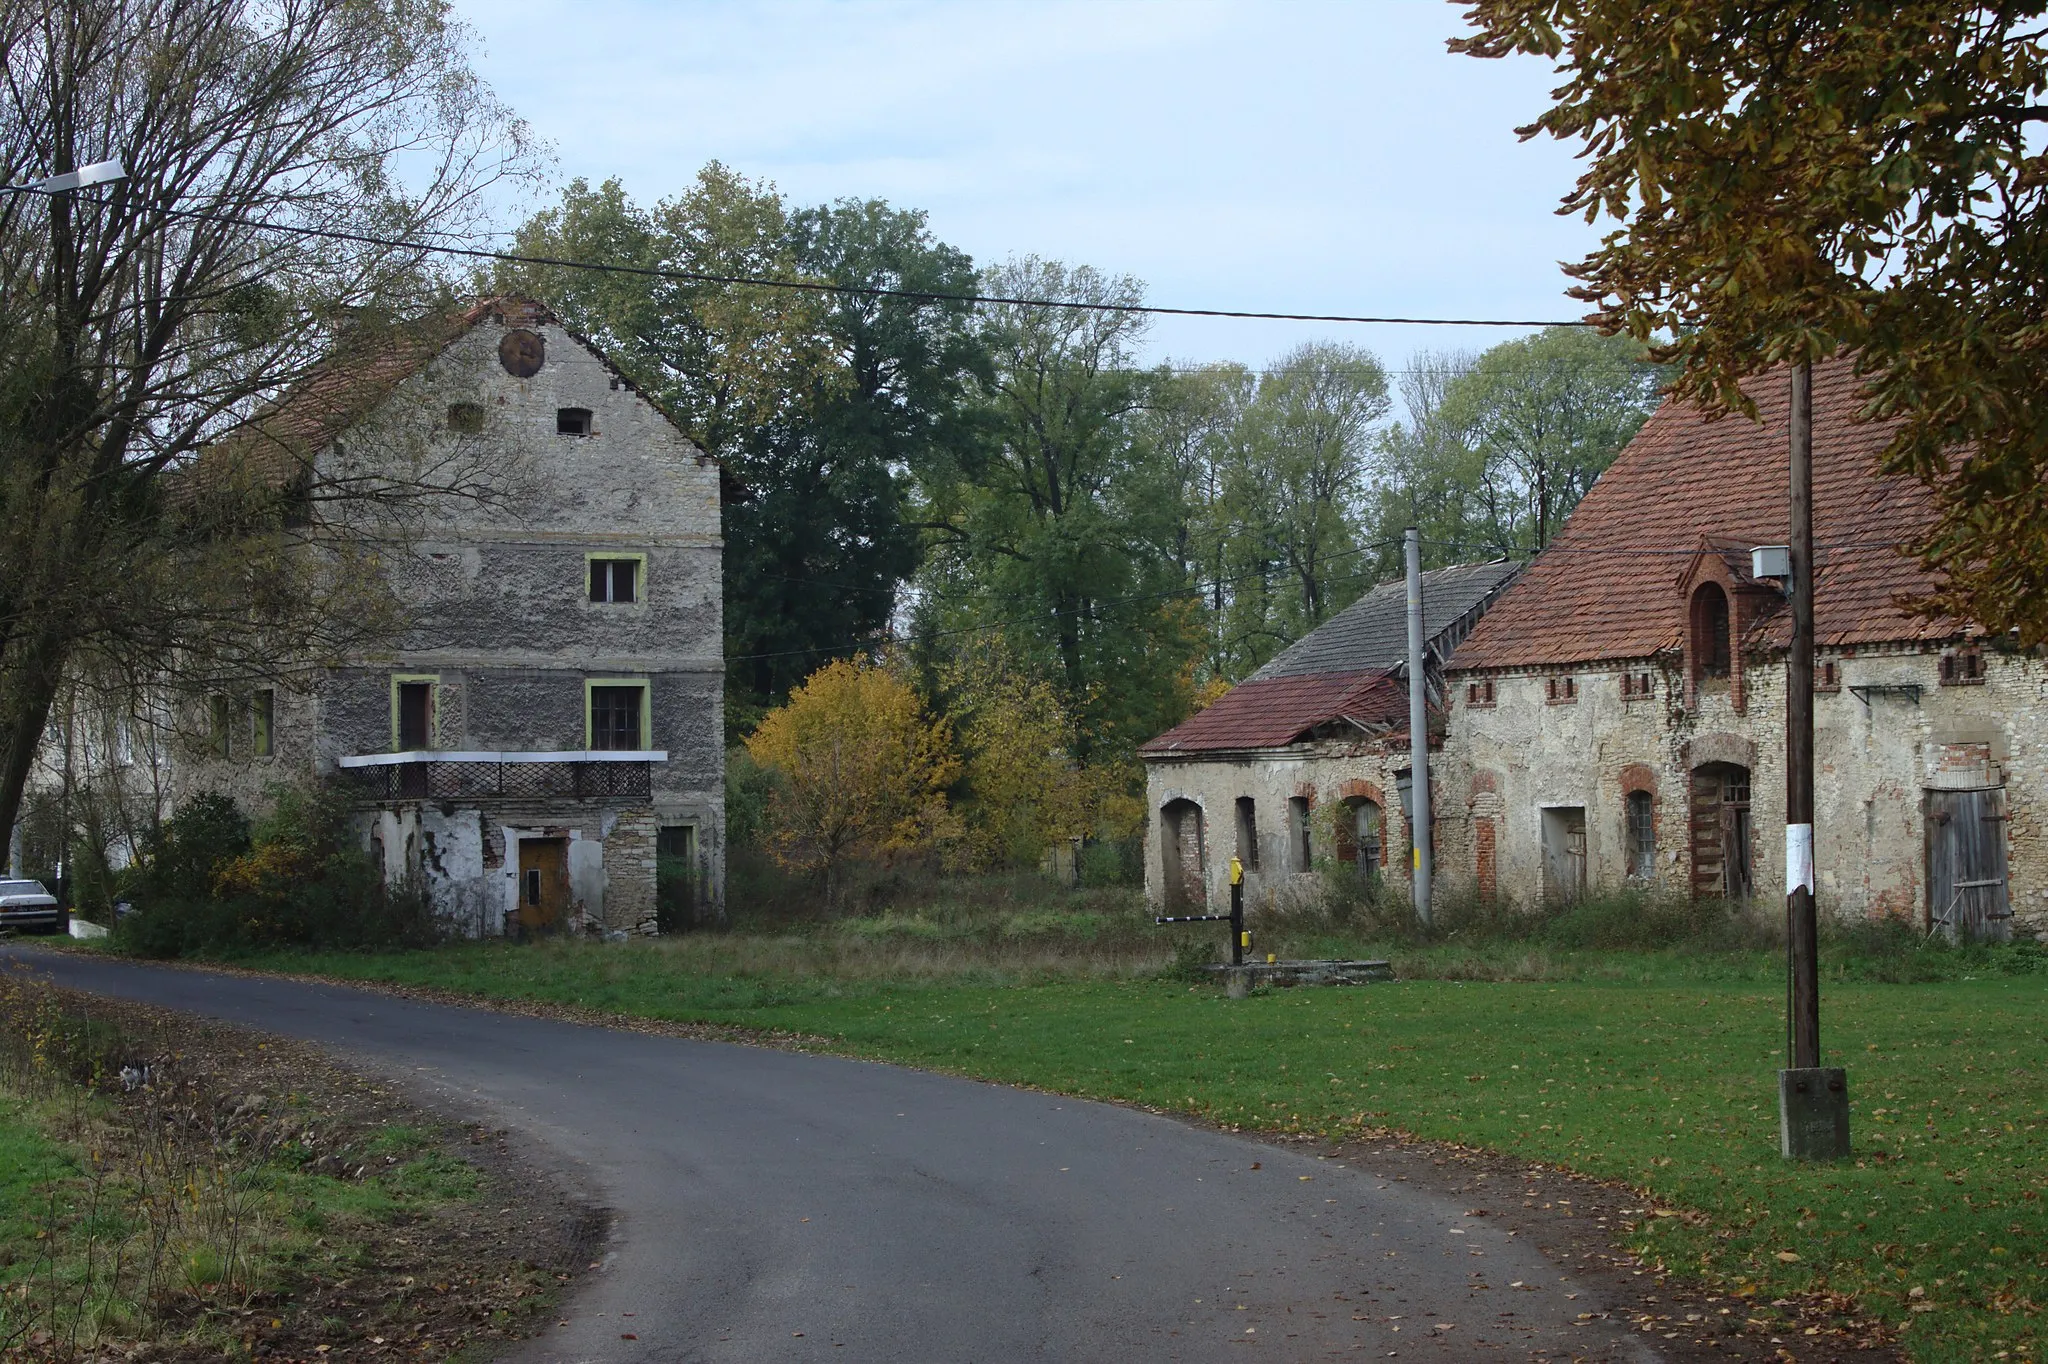 Photo showing: Old buildings in the village of Kalinowice, Opole Voivodeship, PL